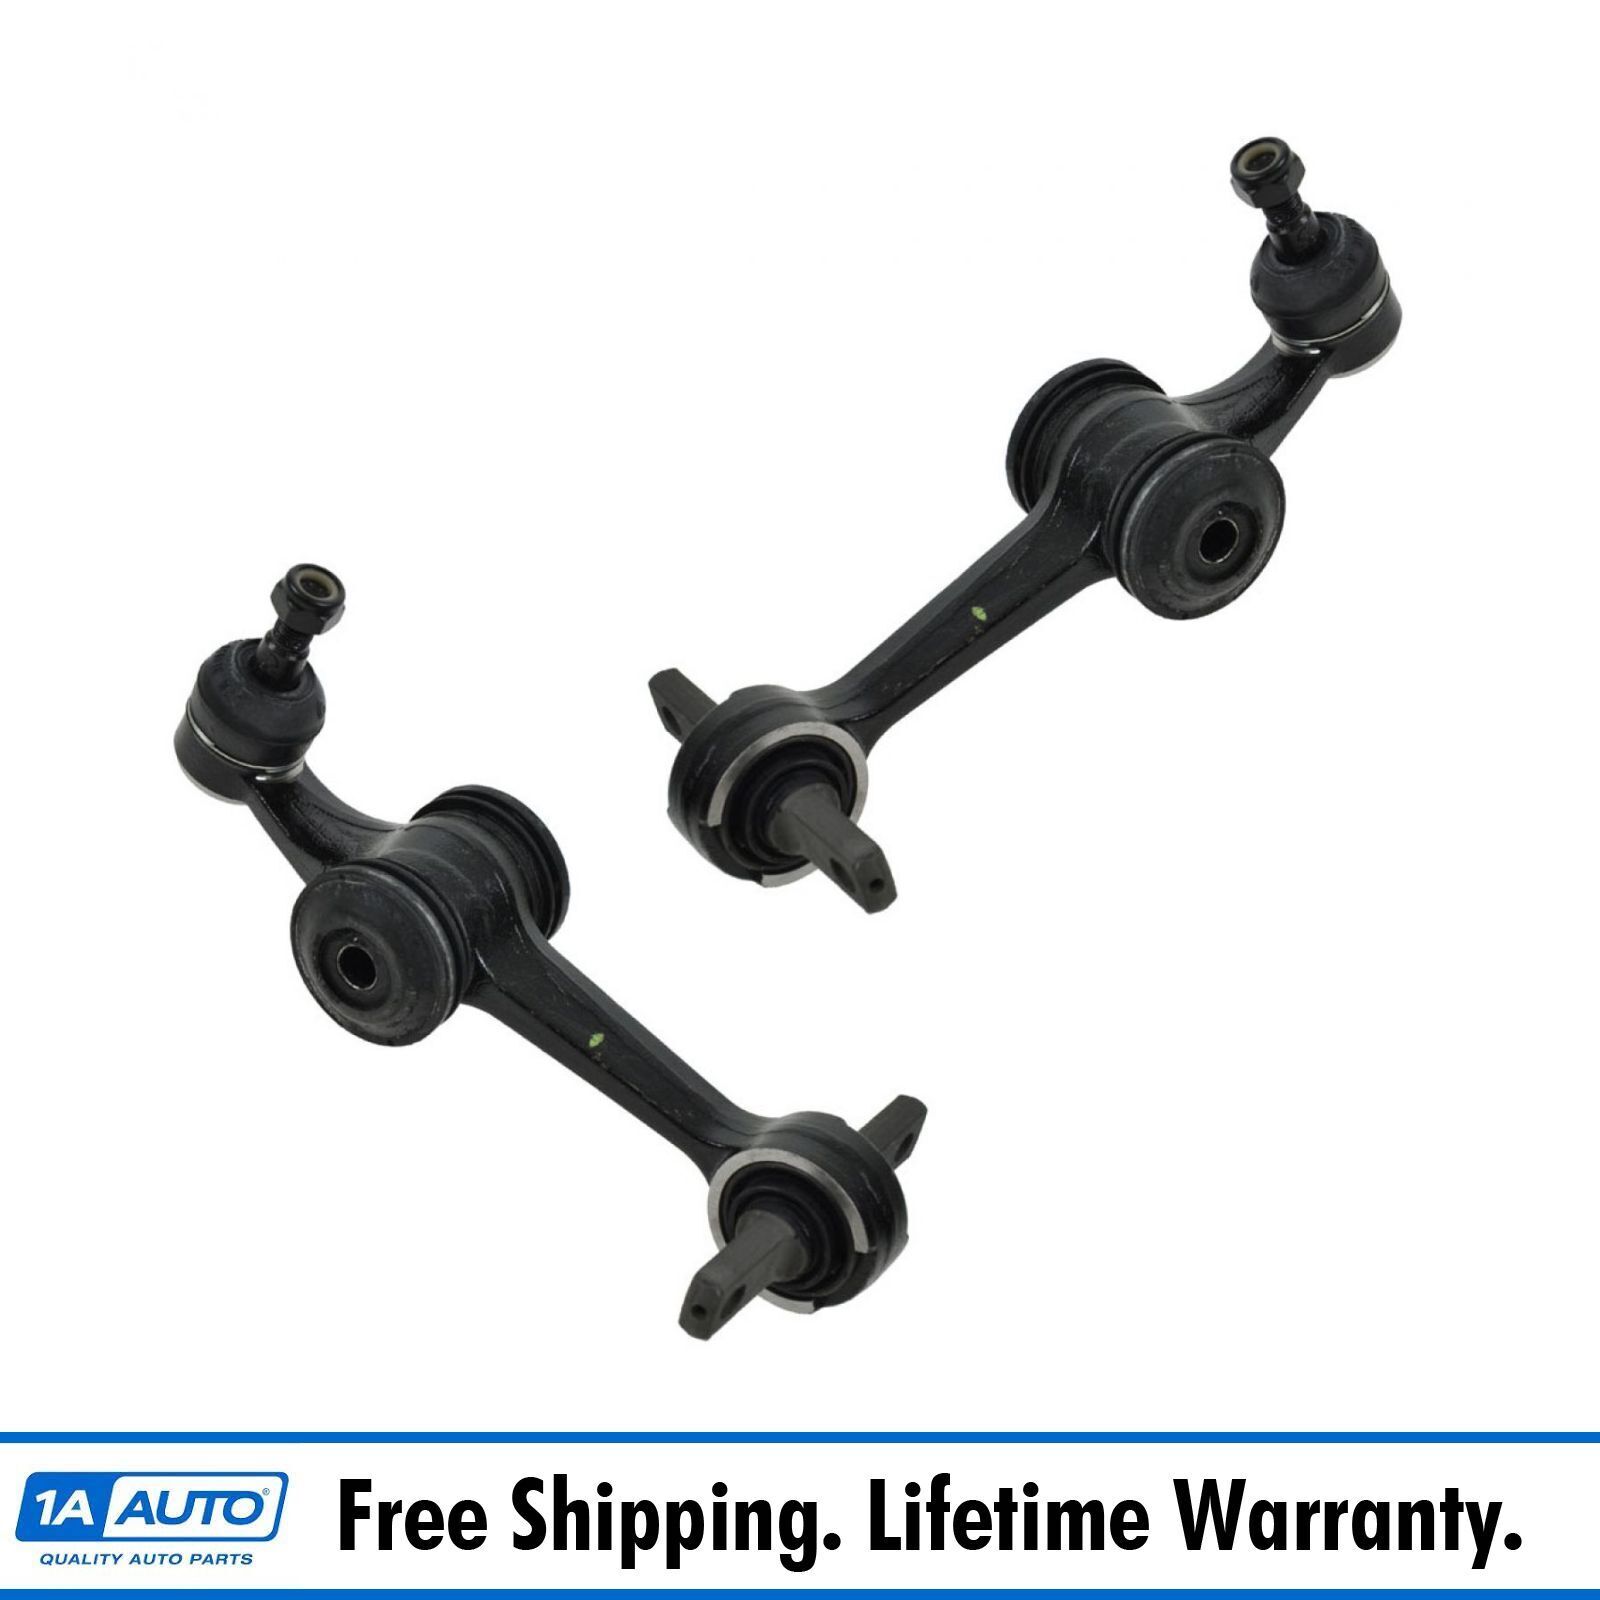 Rear Upper Control Arm Left & Right Pair Set of 2 for 91-95 Acura Legend